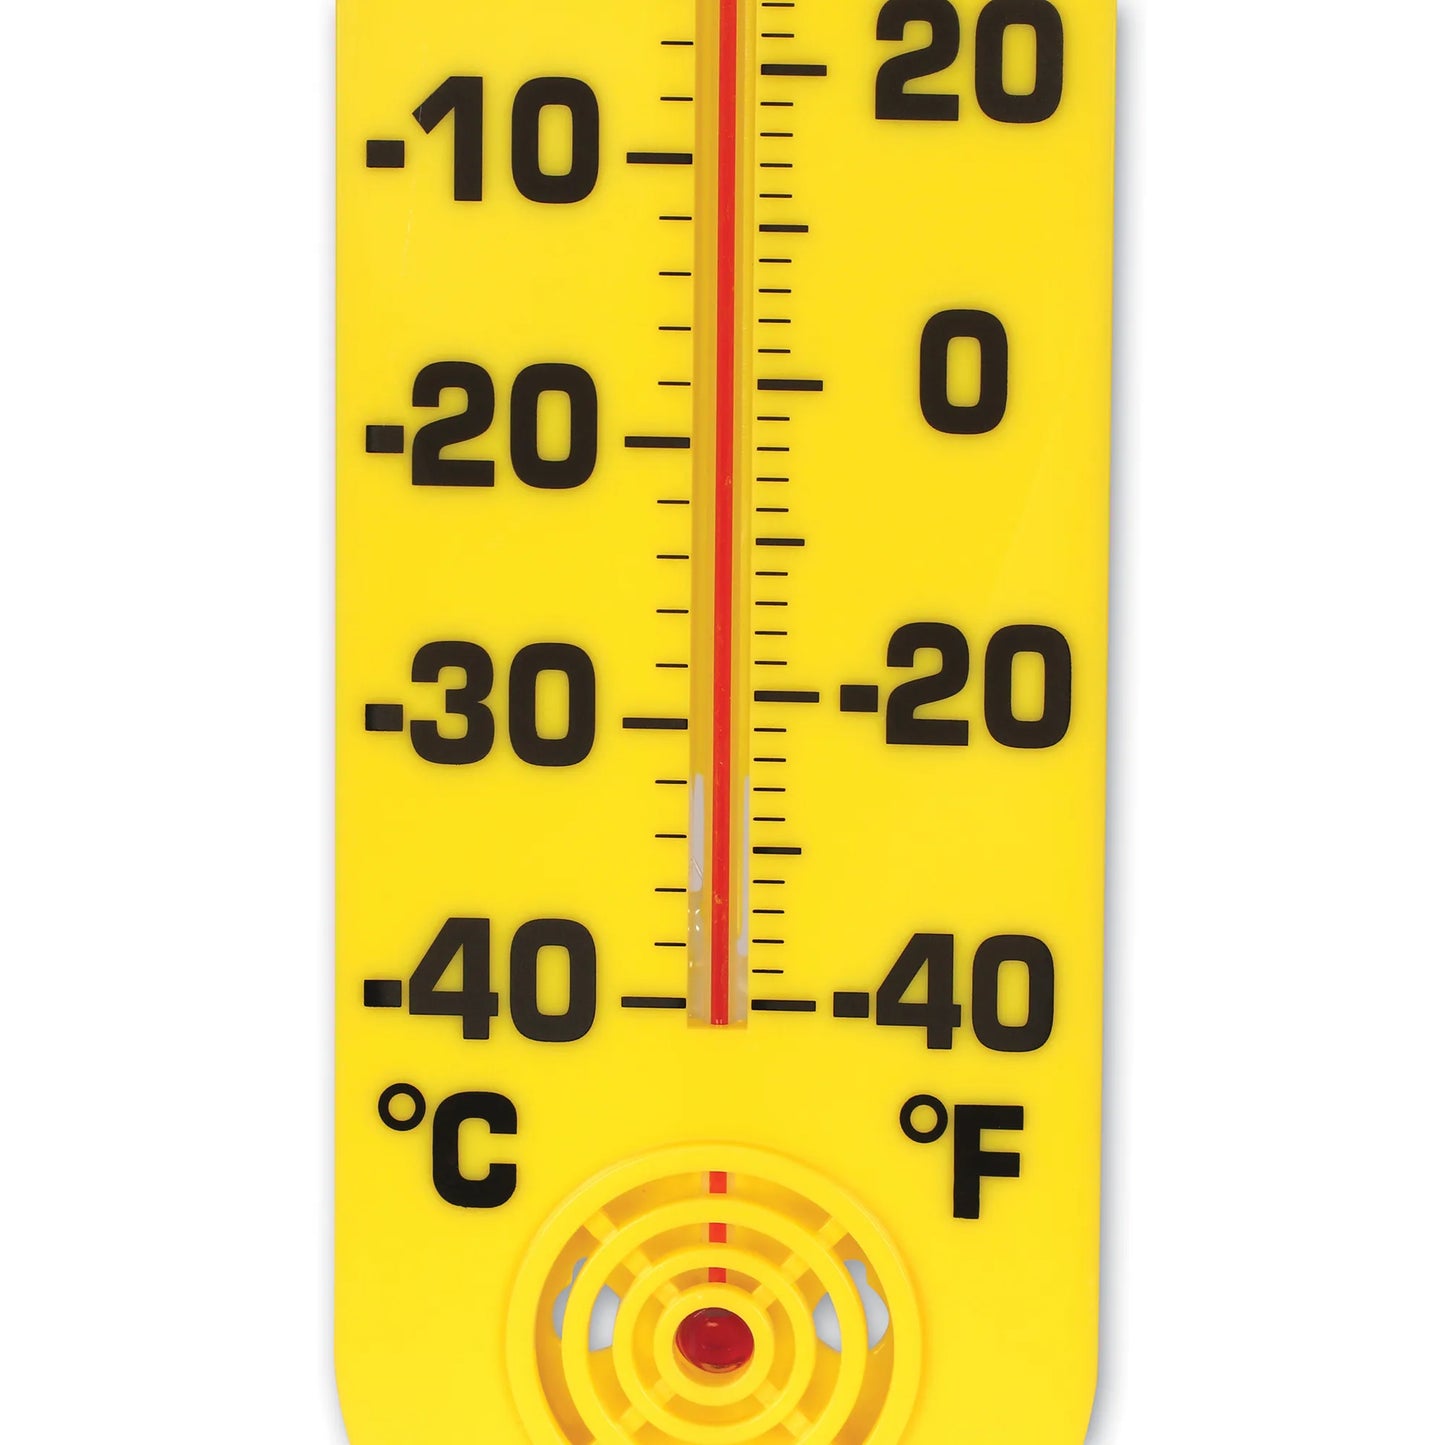 Learning Resources 15" Classroom Thermometer